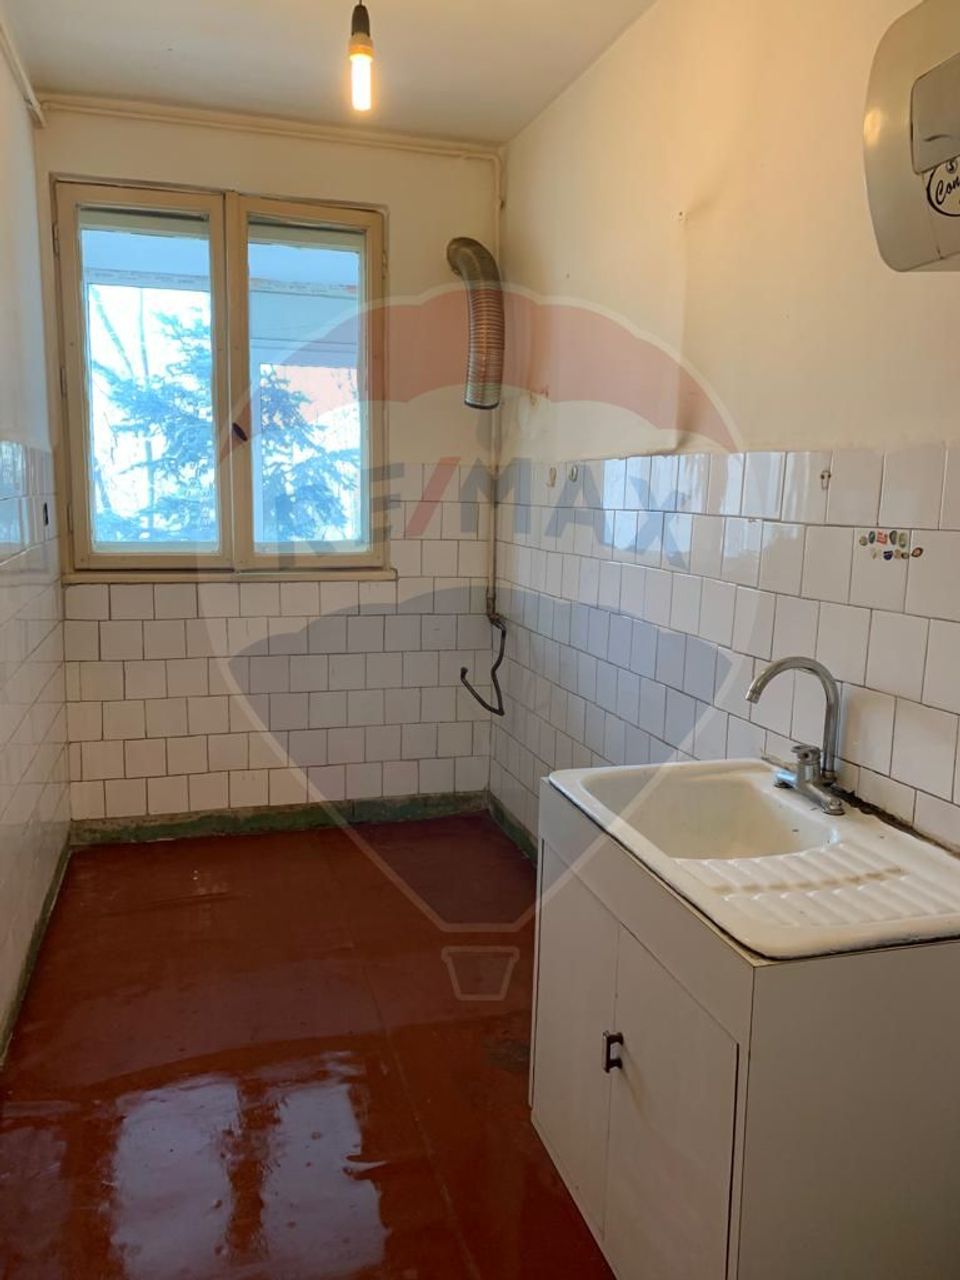 OPPORTUNITY! 2 rooms,51.2sqm, newly thermo-insulated block, North